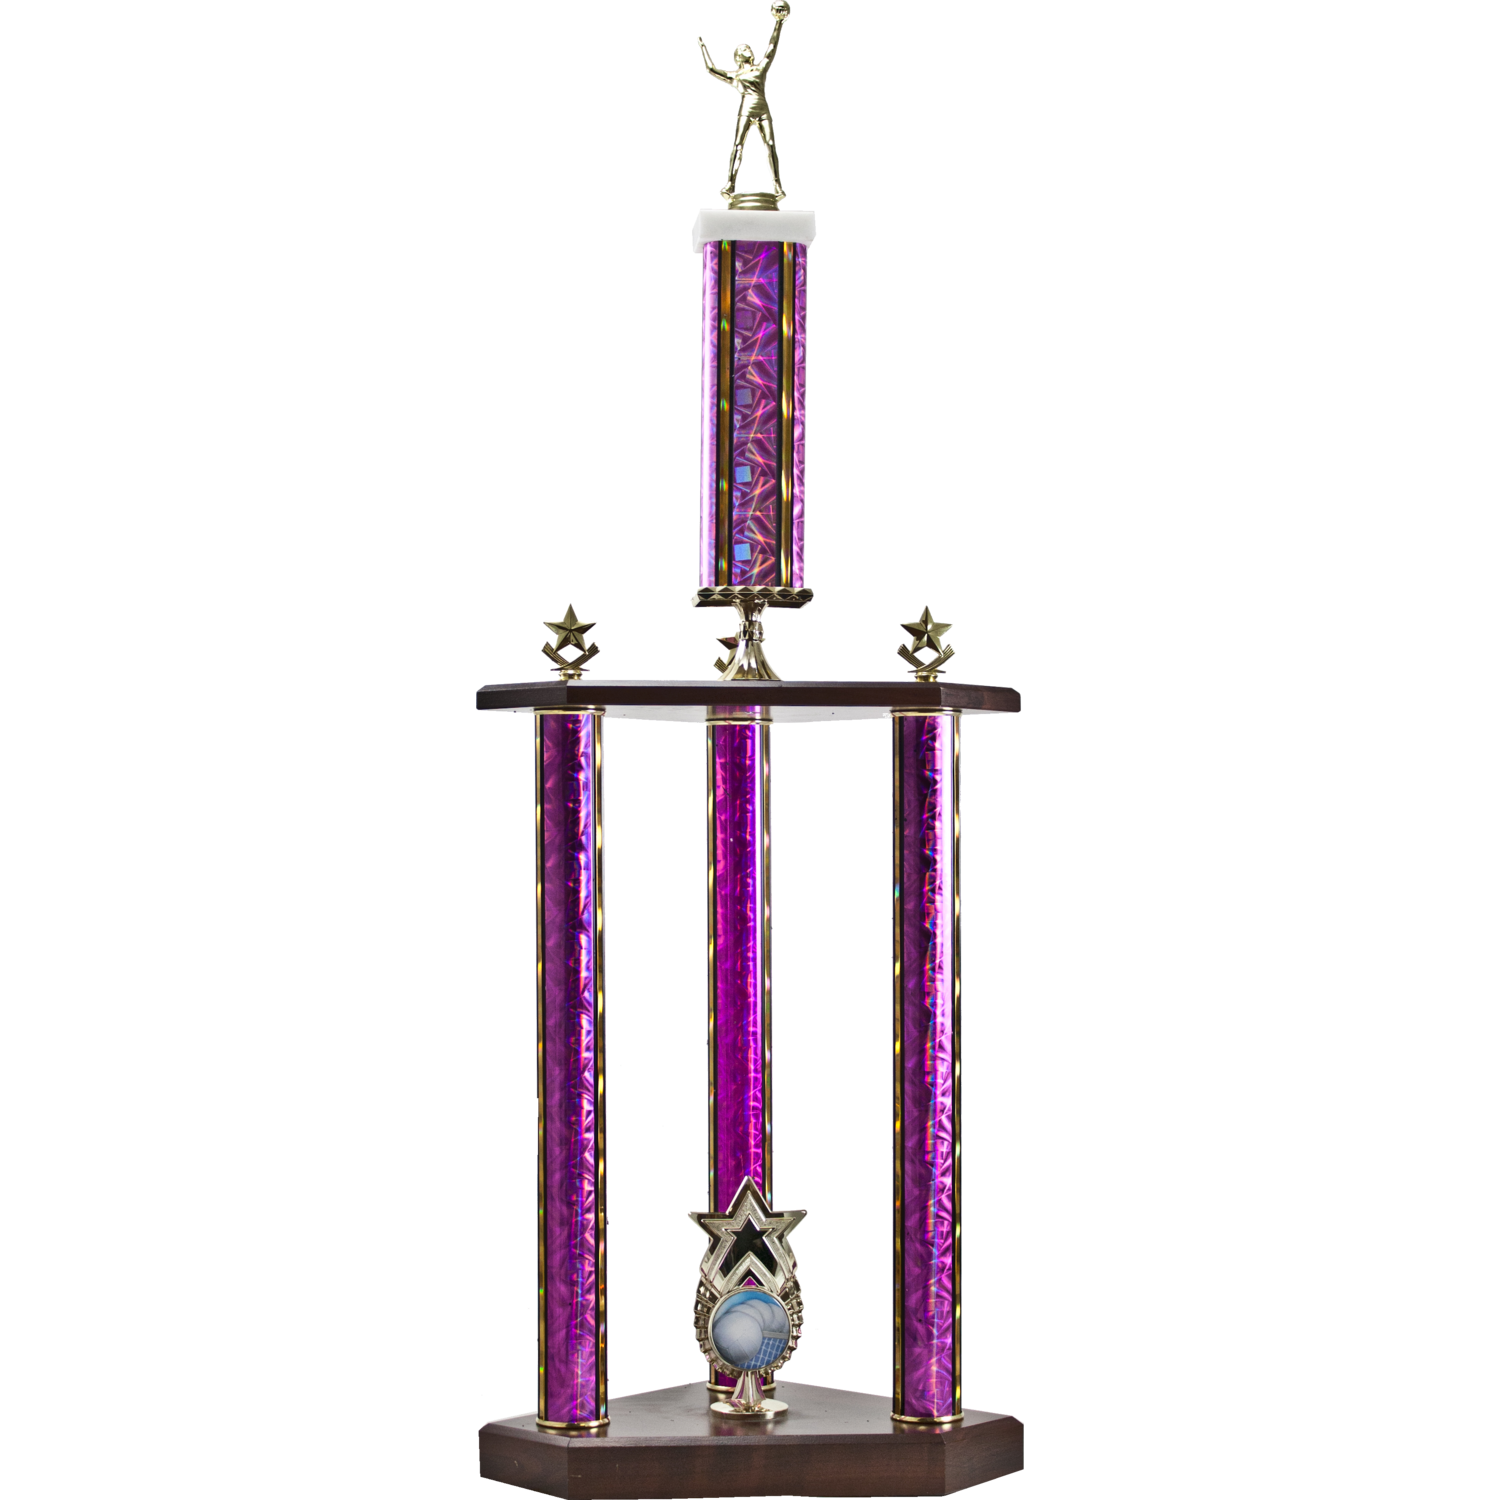 Traditional Series Two-Tier 3 Post Trophy With Star "Exclusive" Star | Global Recognition Inc